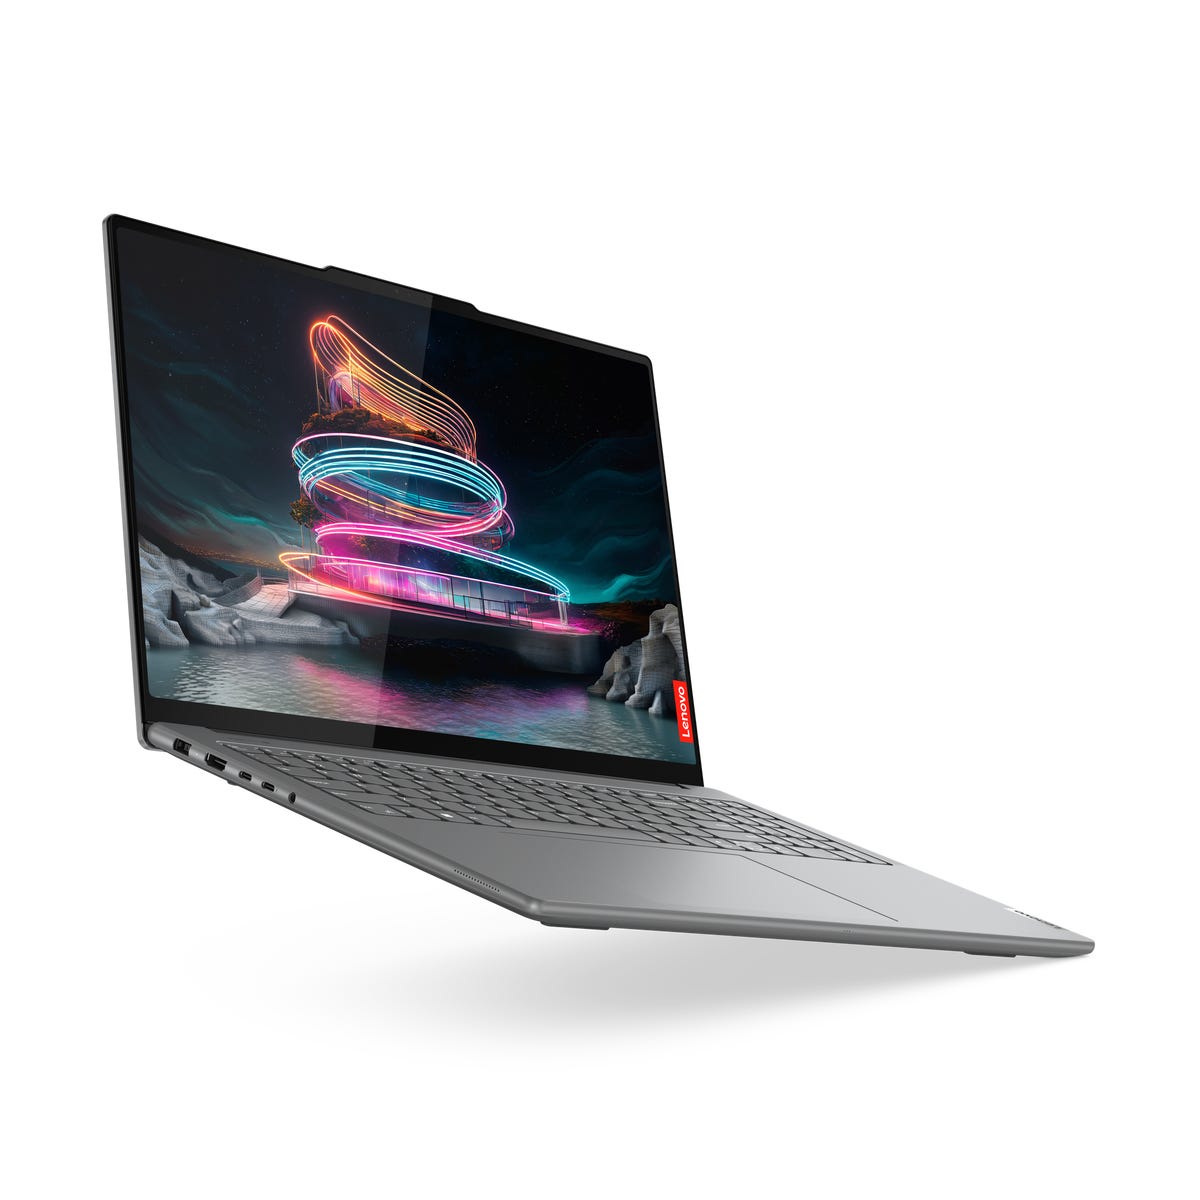 Lenovo Yoga Pro 9i 16 Gen 9 convertible two-in-on